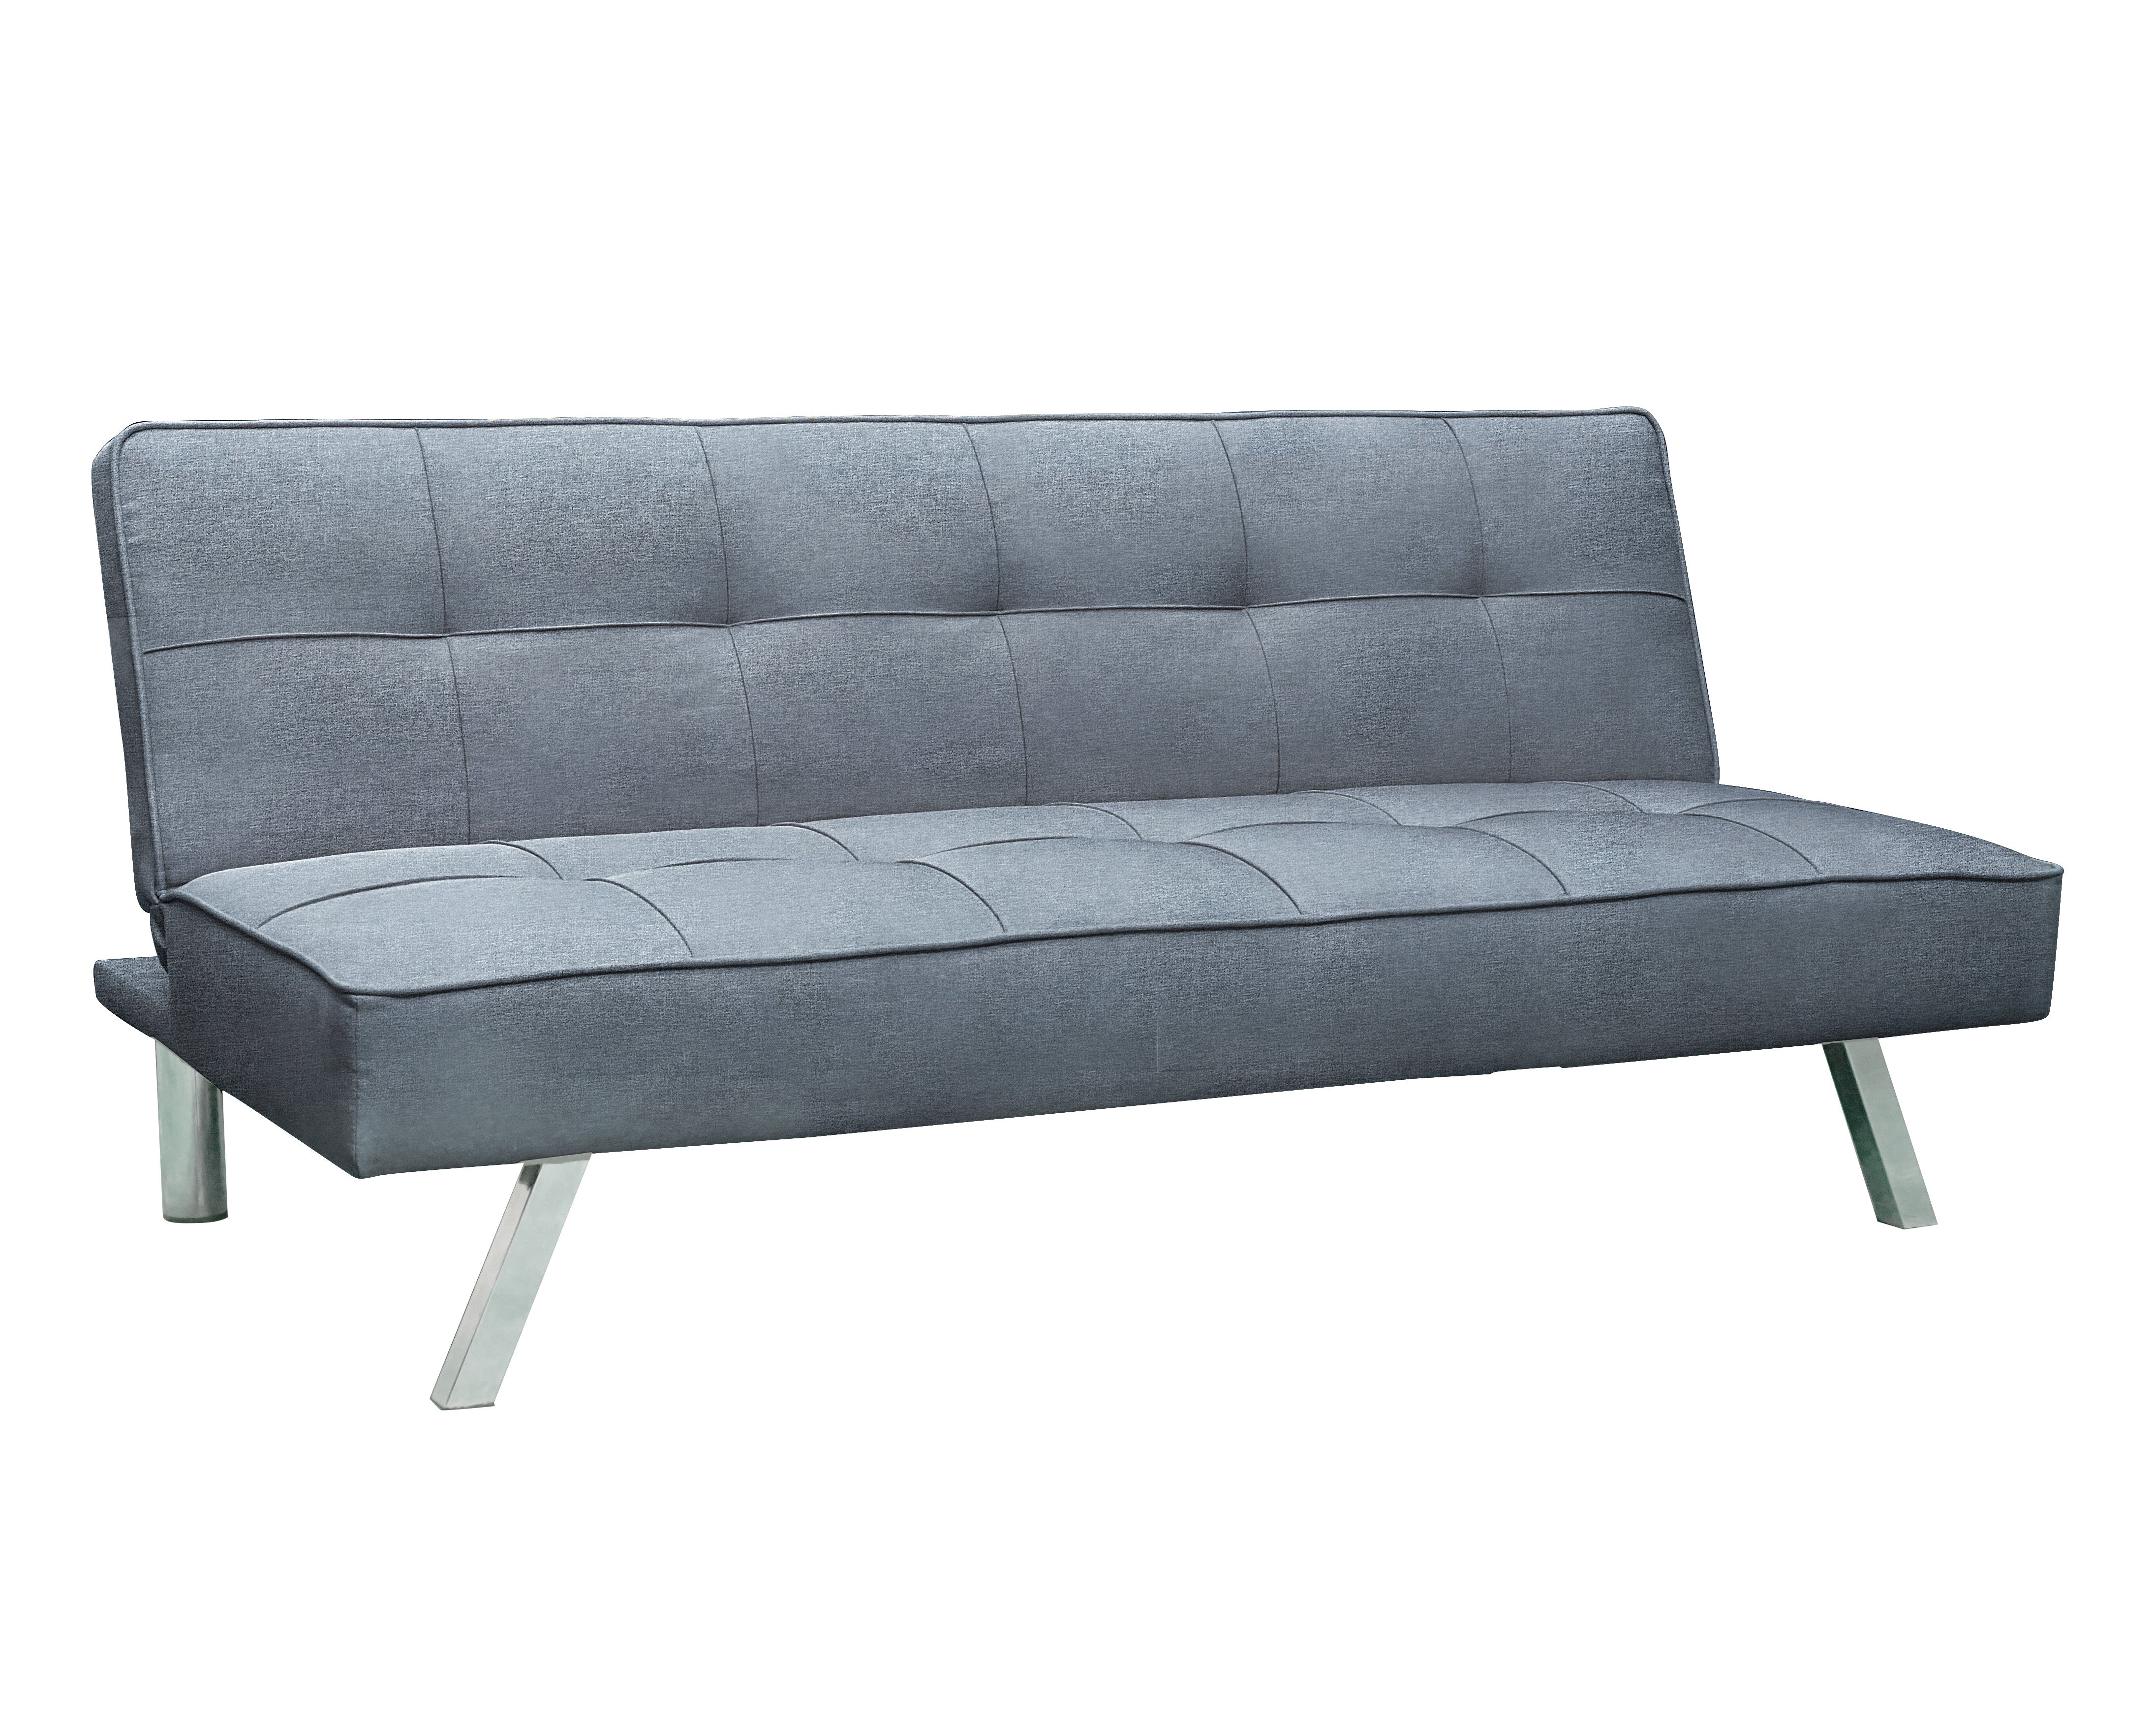 Sleeper Sofa Bed Grey Gray Convertible Couch Modern Living Room Futon-Futons, Frames & Covers-AULEY